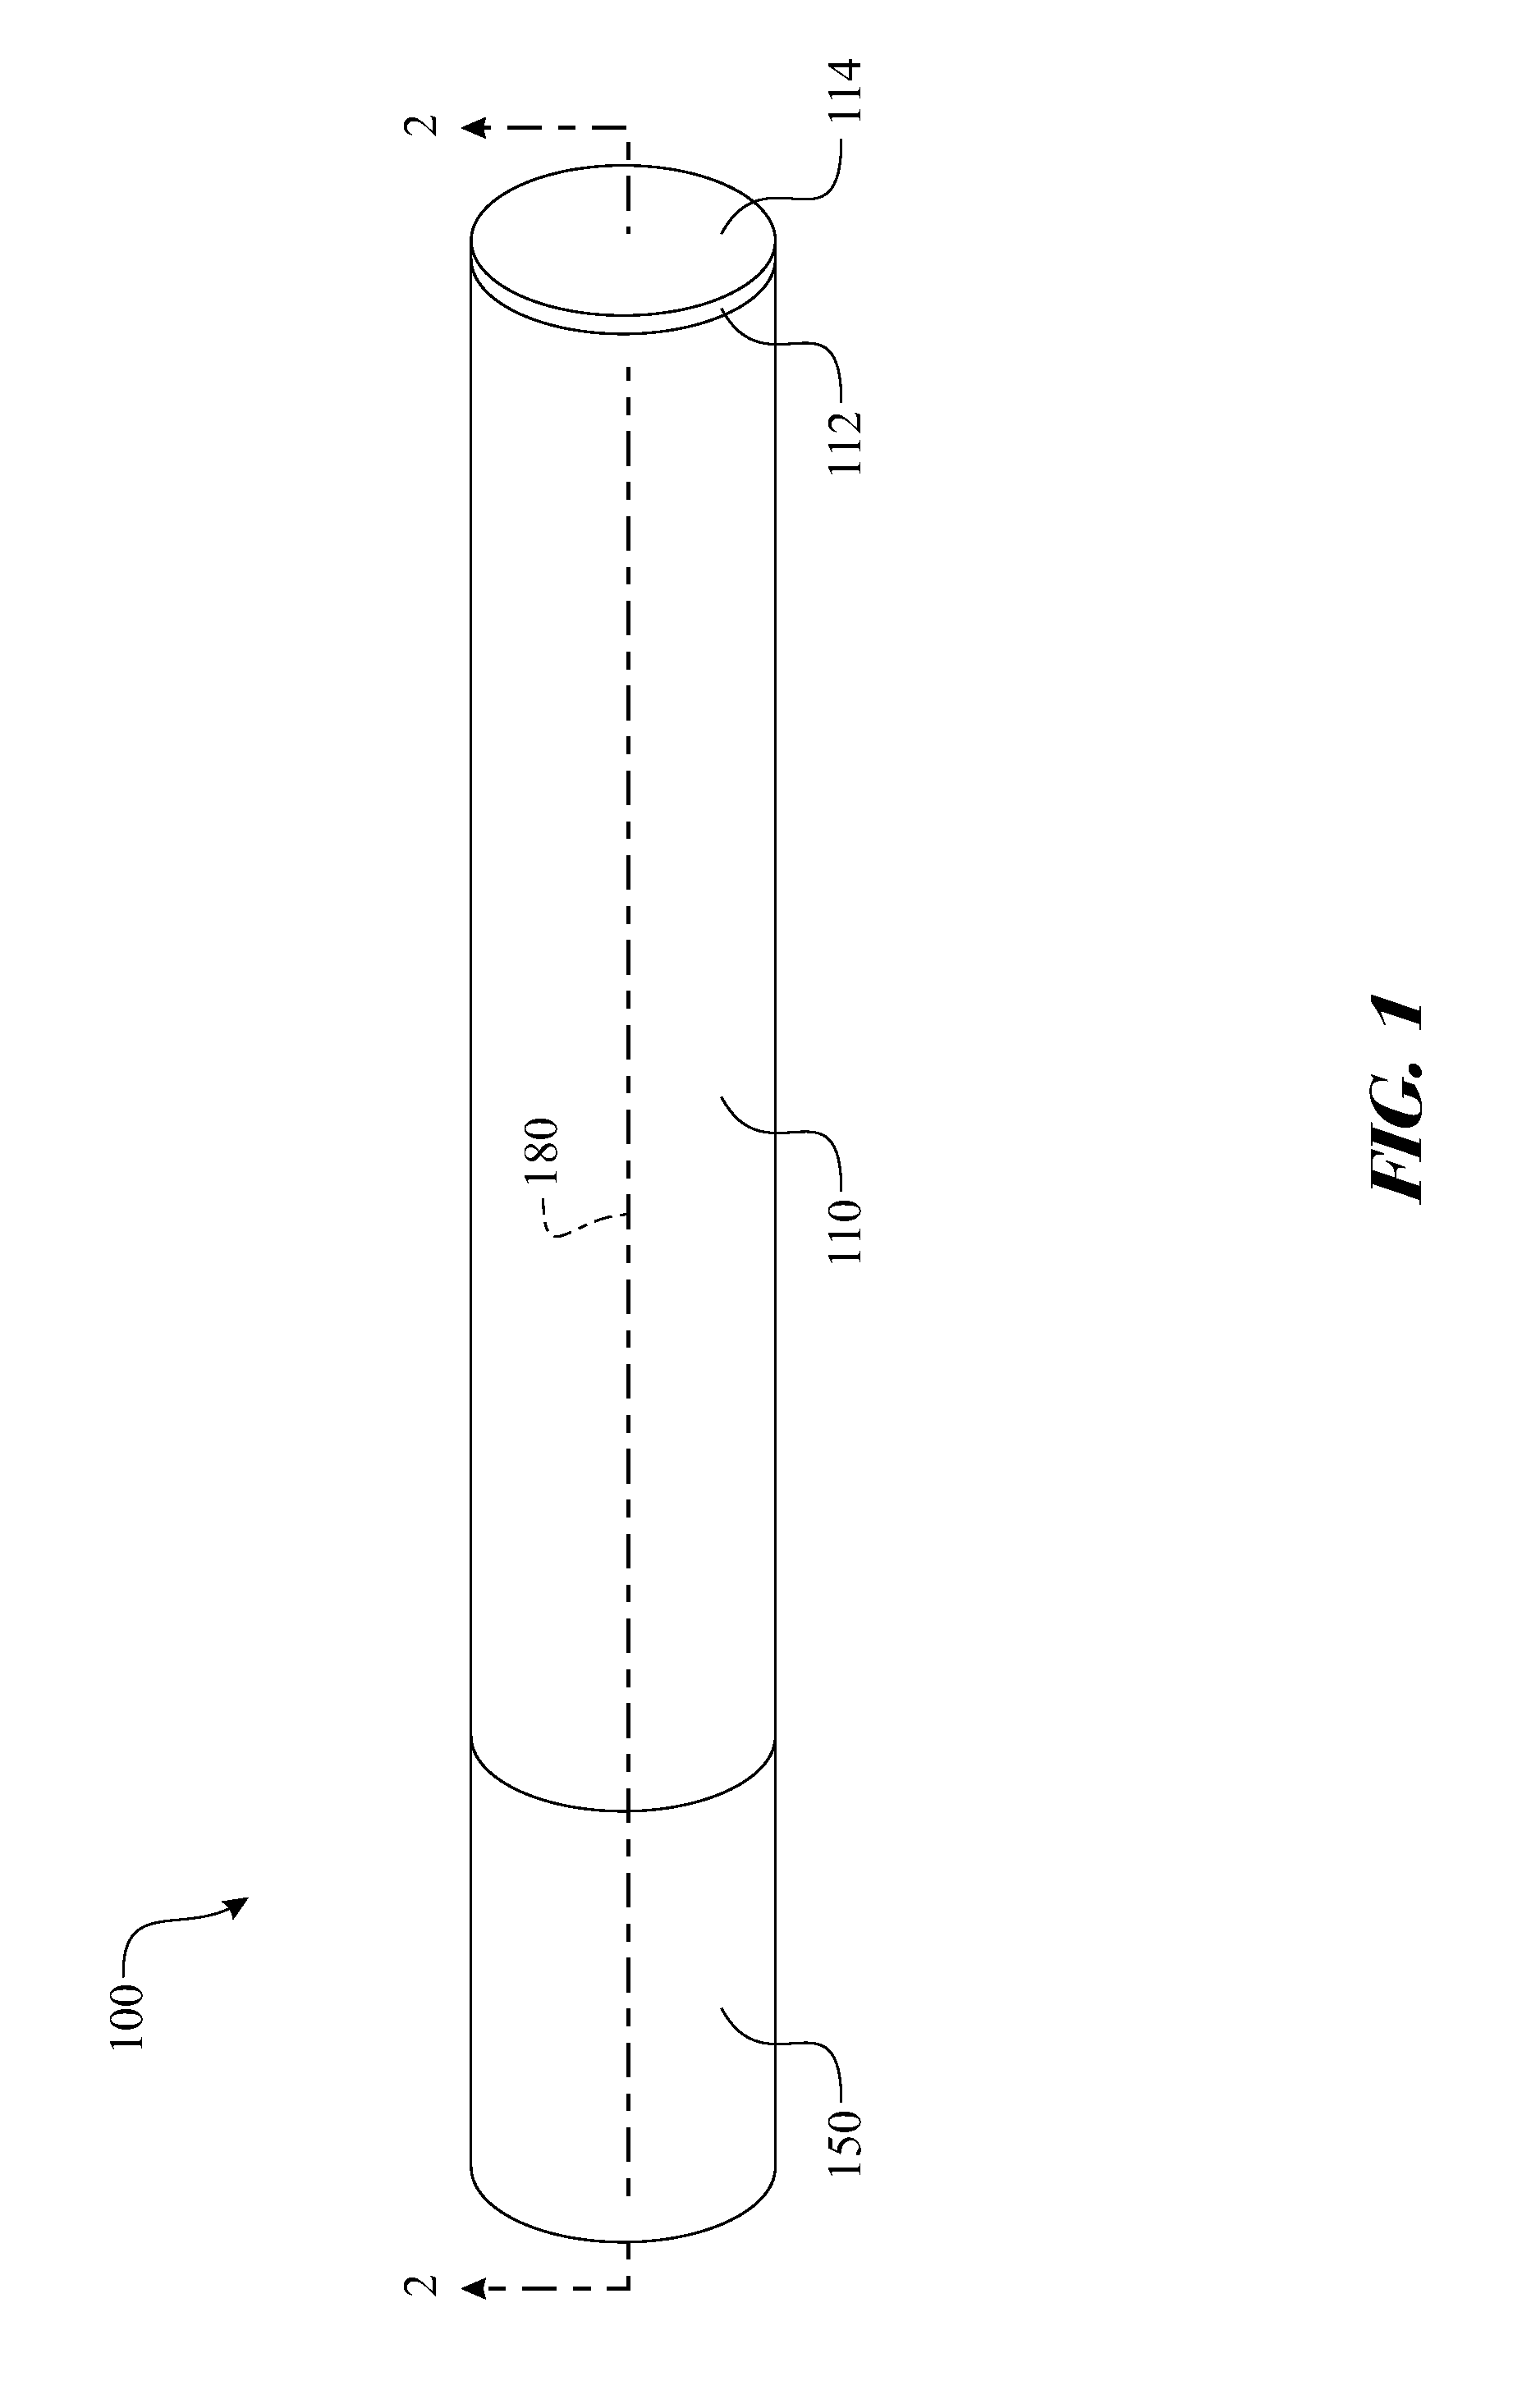 Electronic cigarette with integrated charging mechanism